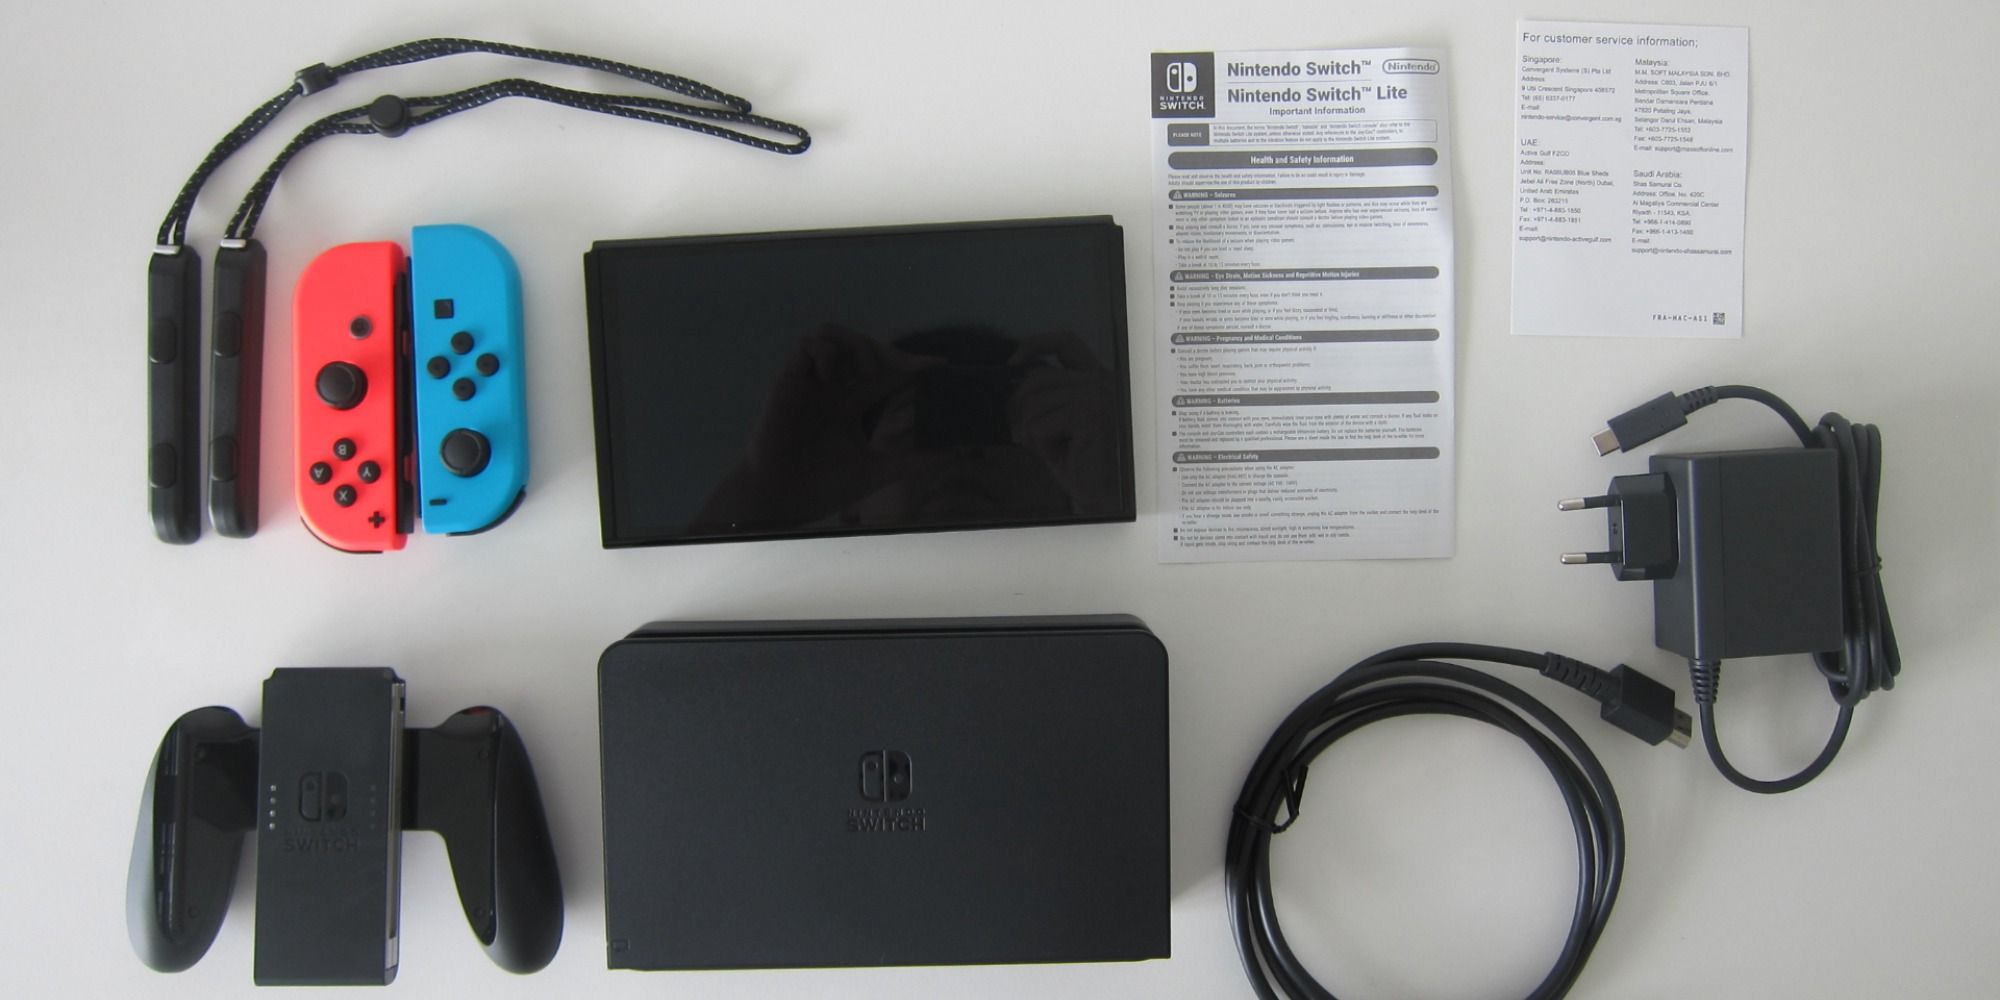 A photo showing the contents of the Nintendo Switch OLED box including instruction booklets